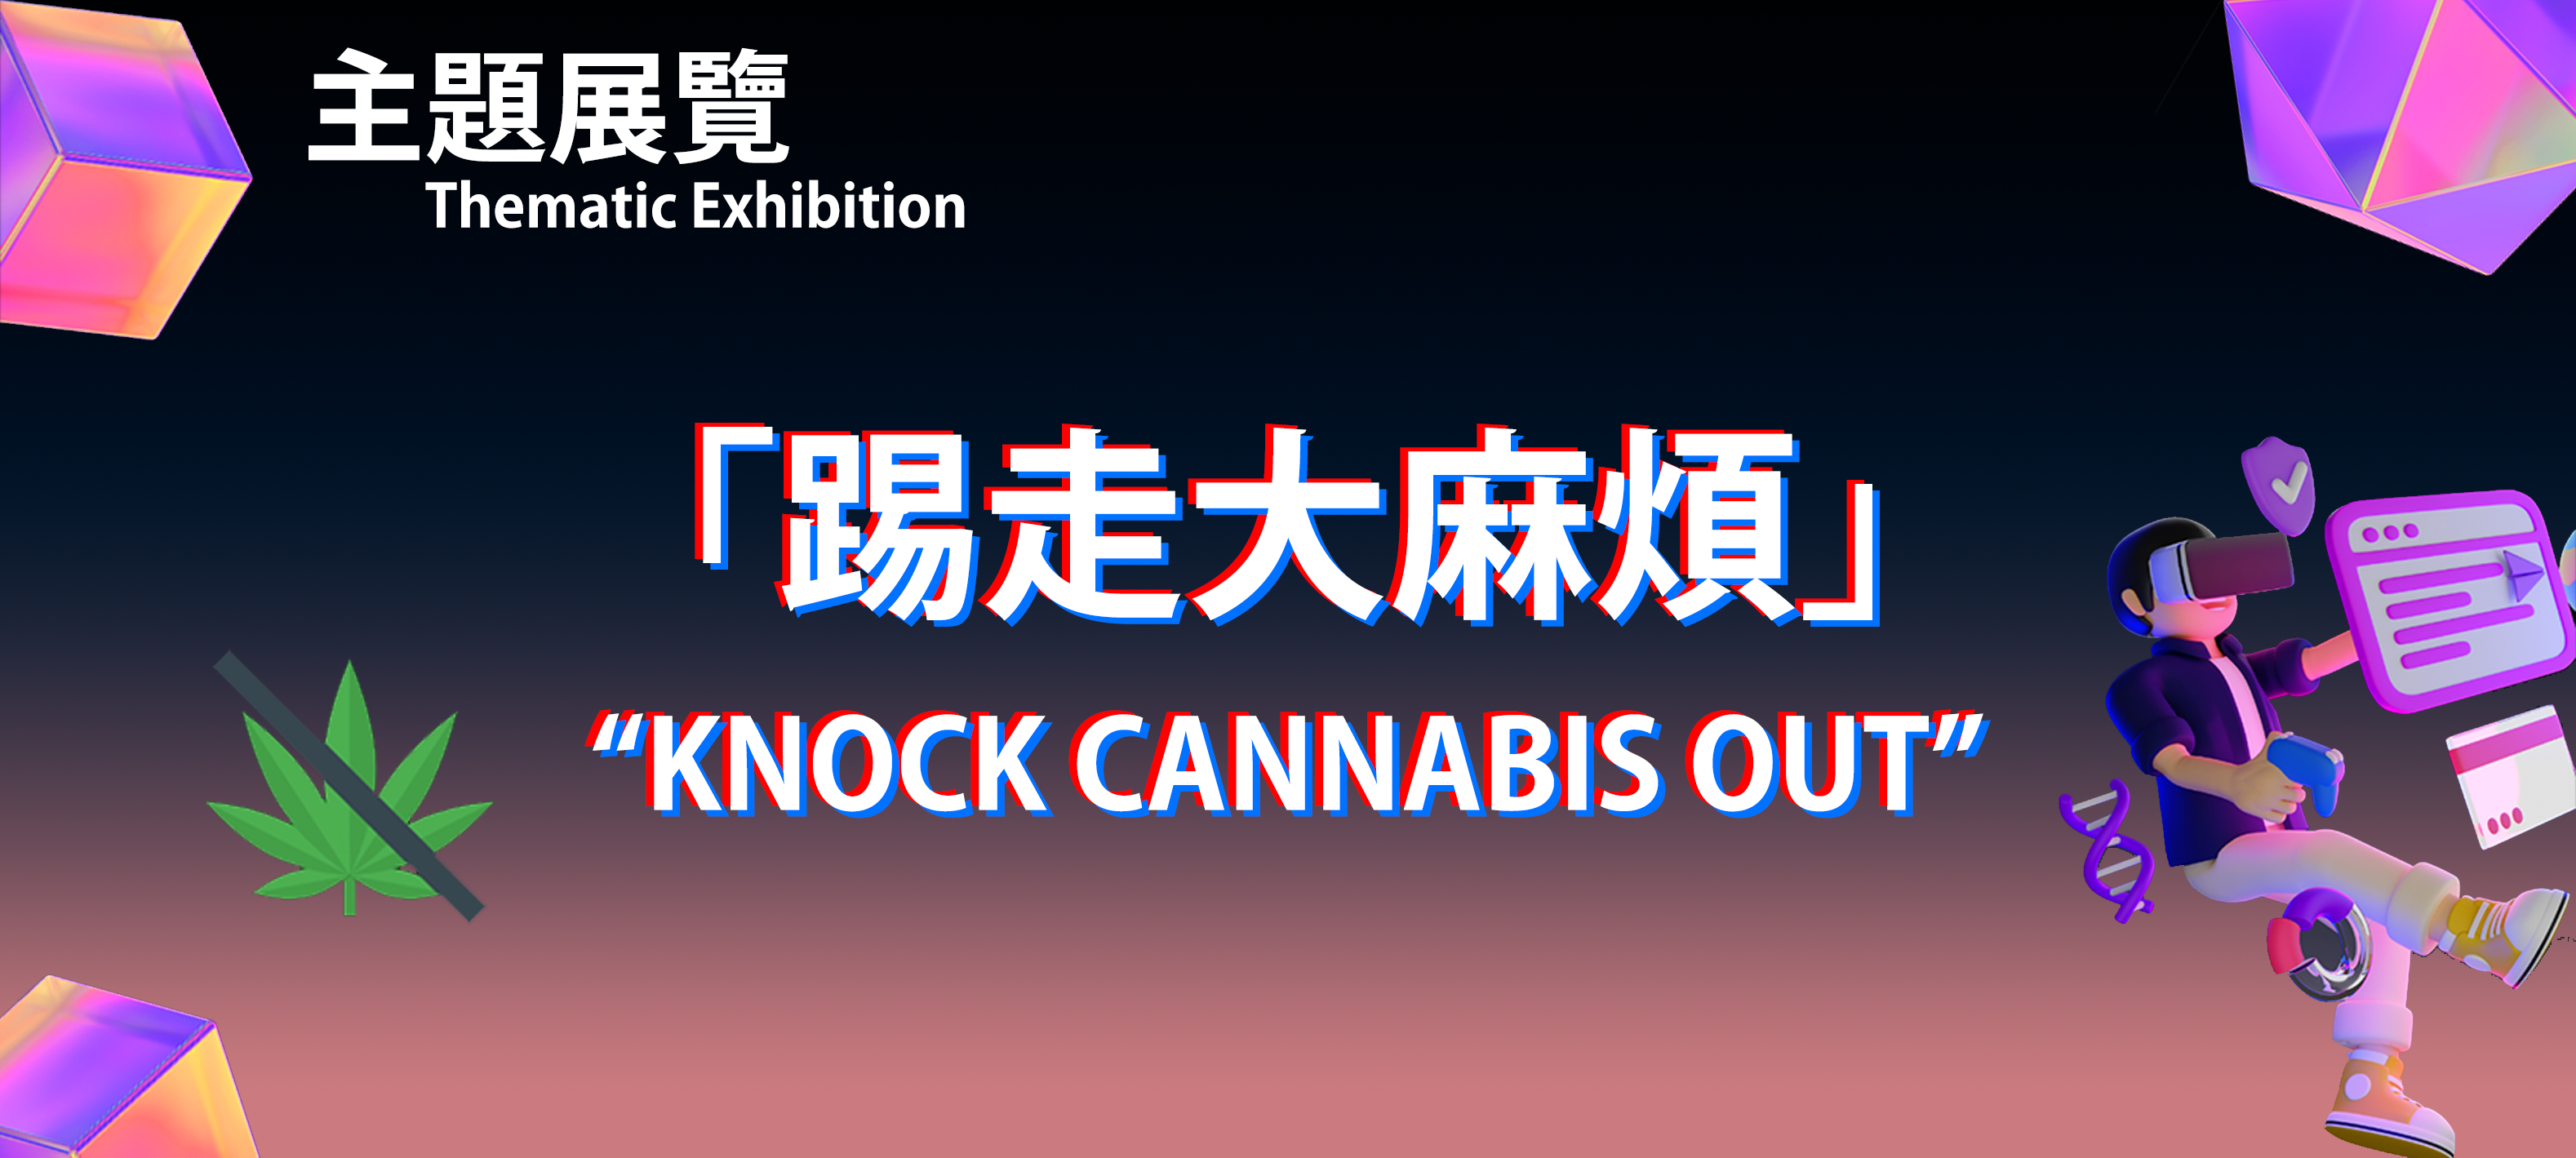 Knock Cannabis Out